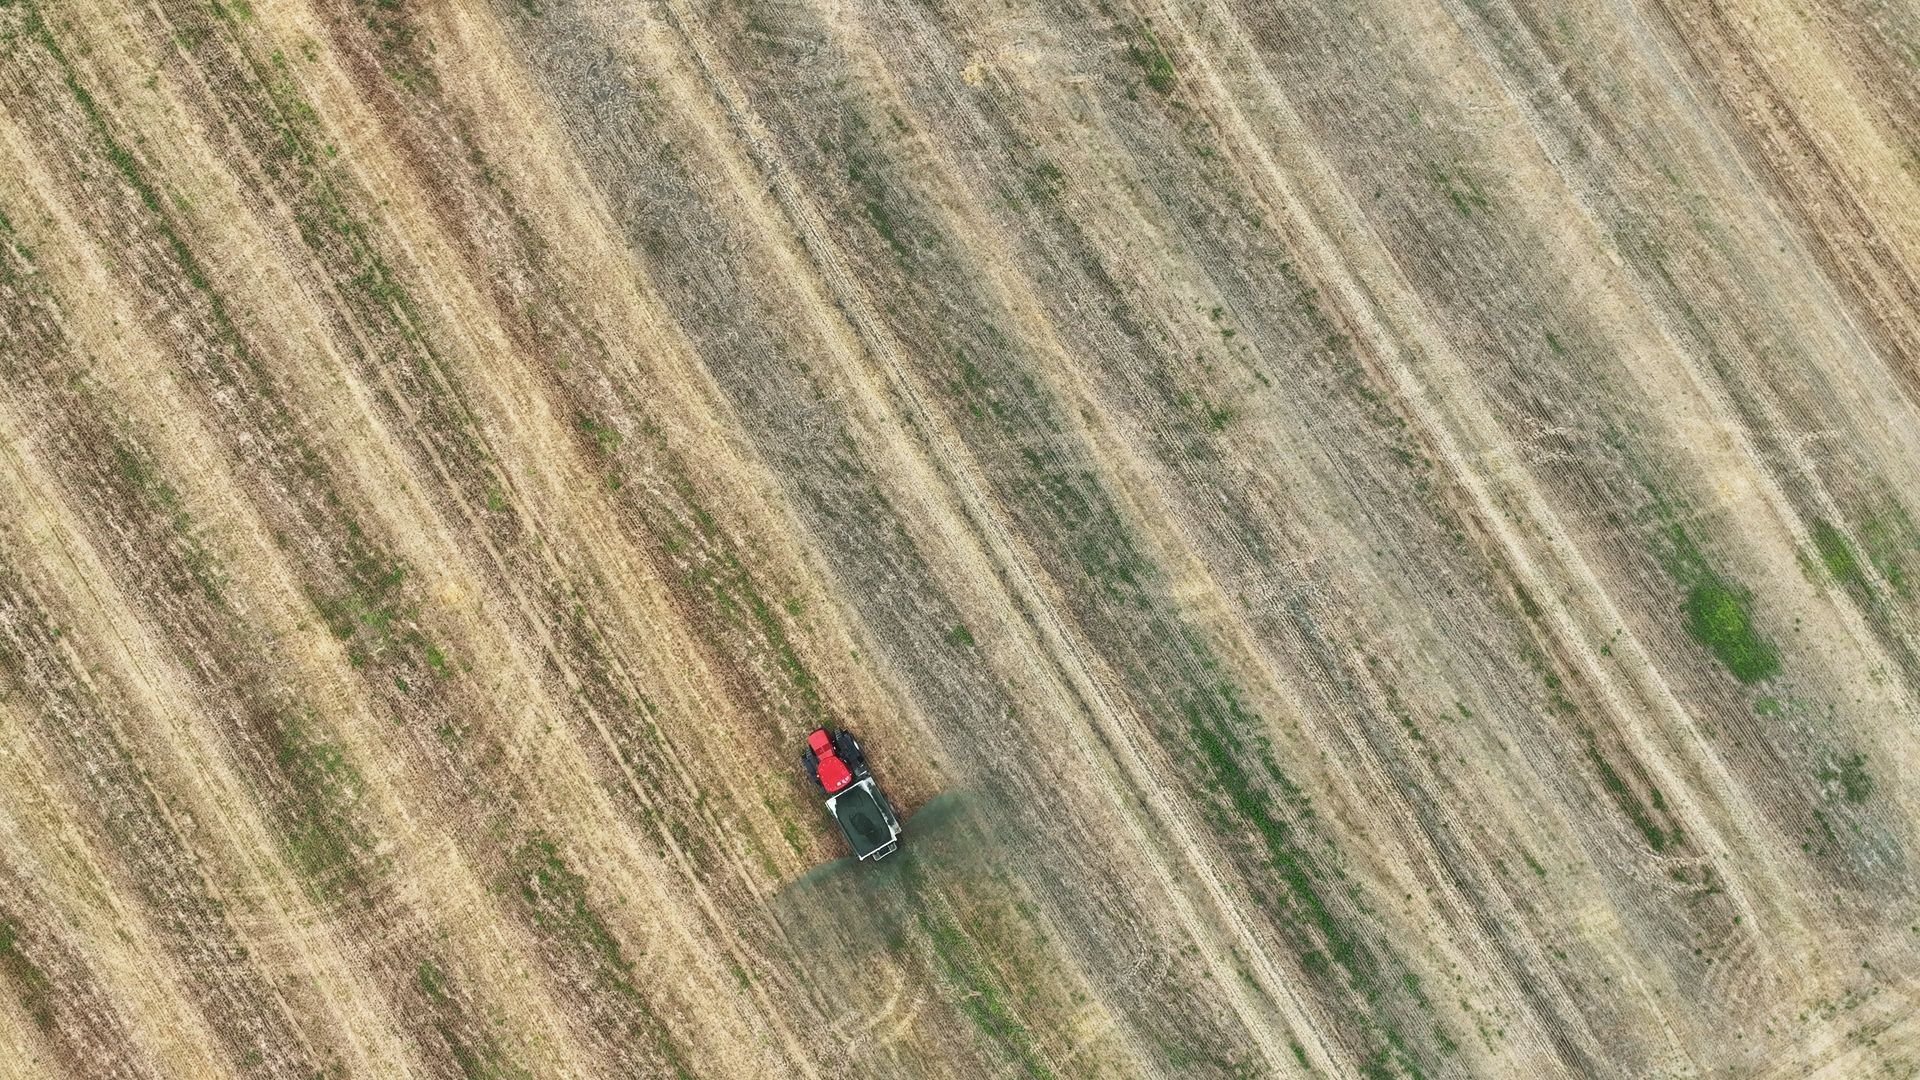 A red tractor, seen from above, spreads basalt rock across a field.